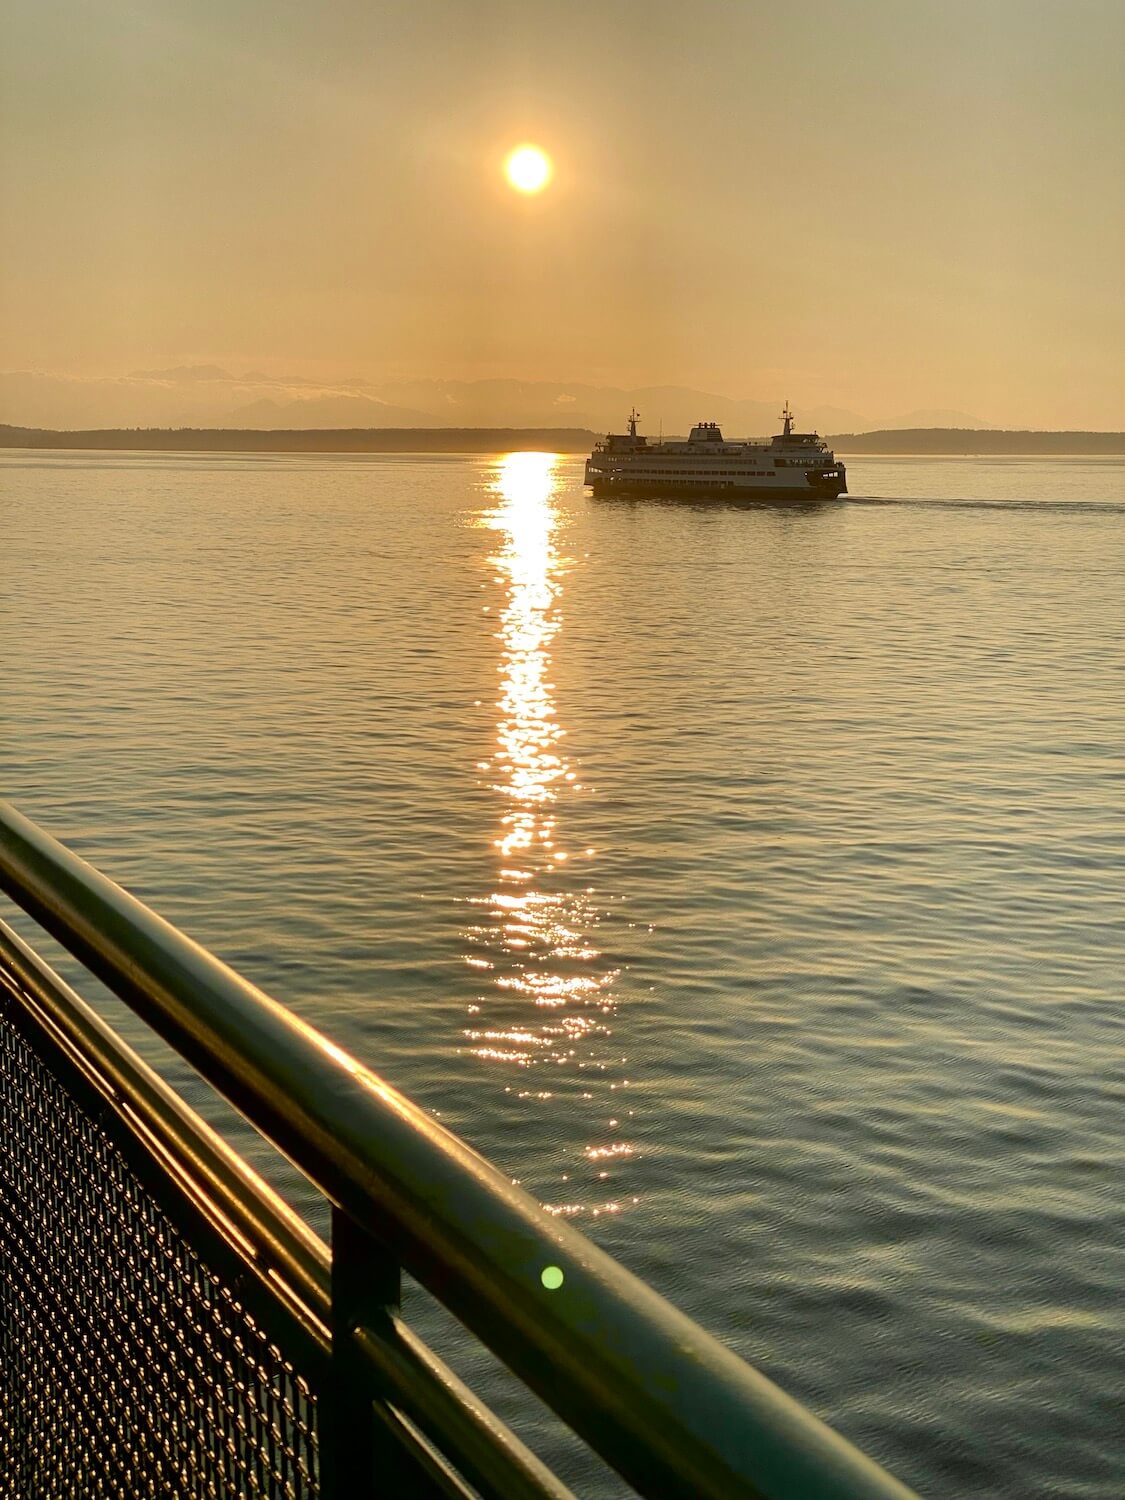 A Washington State Ferry crosses the Salish Sea, as seen from another ferry with a green railing.  The sun is setting over the Olympic Mountain range.